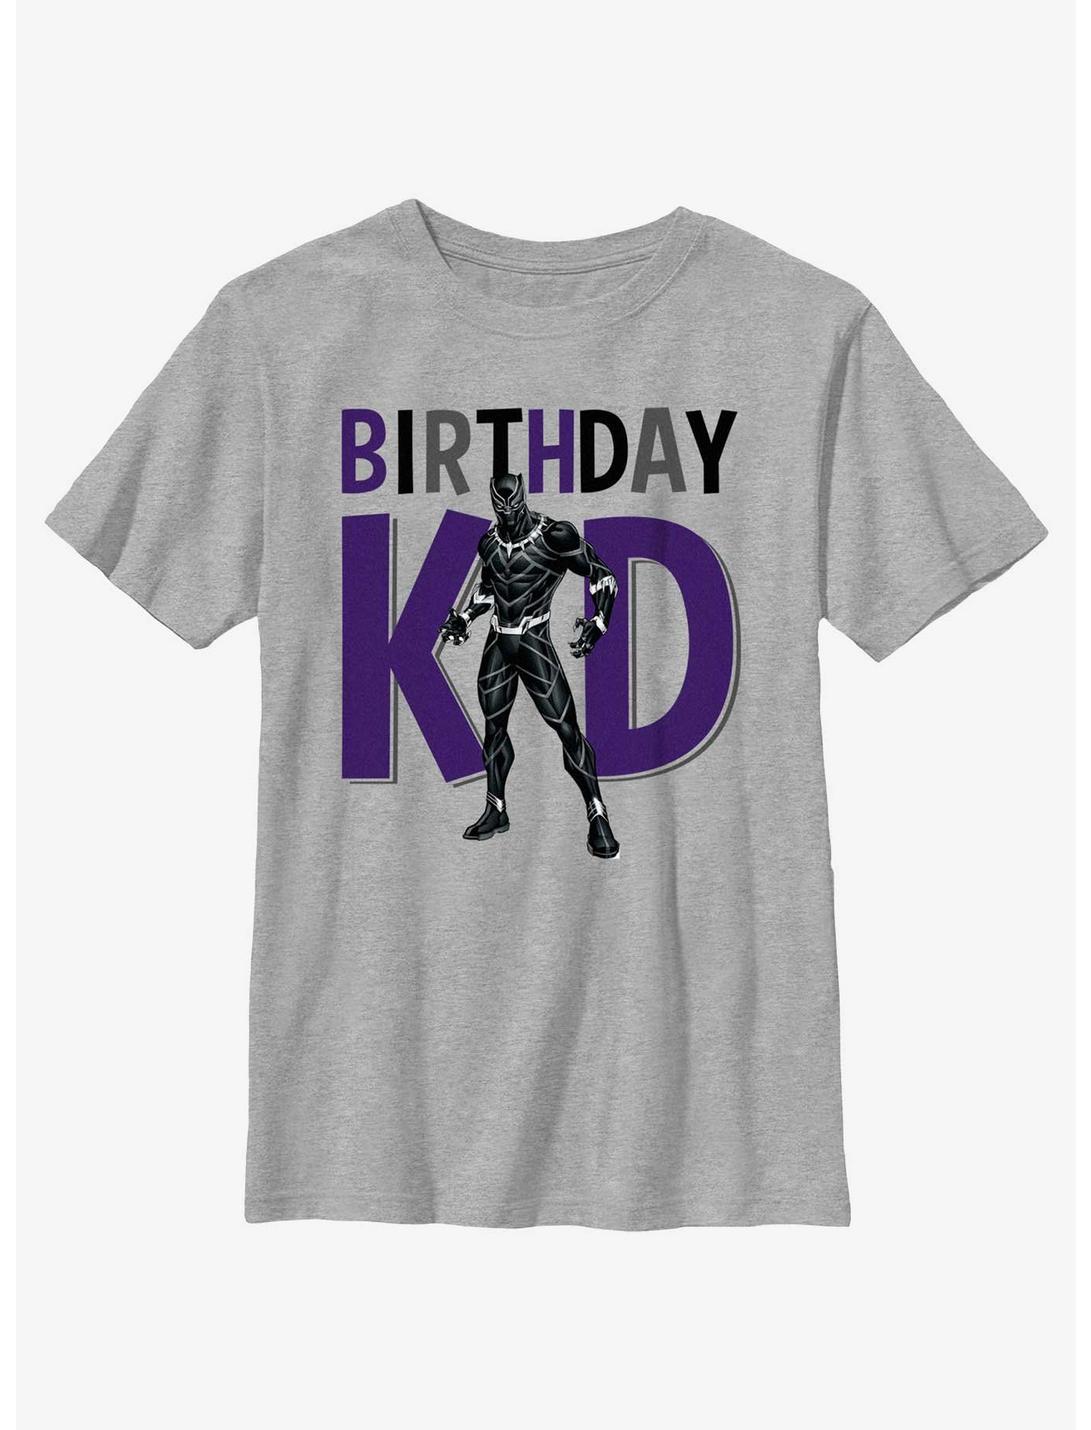 Marvel Avengers Birthday Kid Black Panther Youth T-Shirt, ATH HTR, hi-res